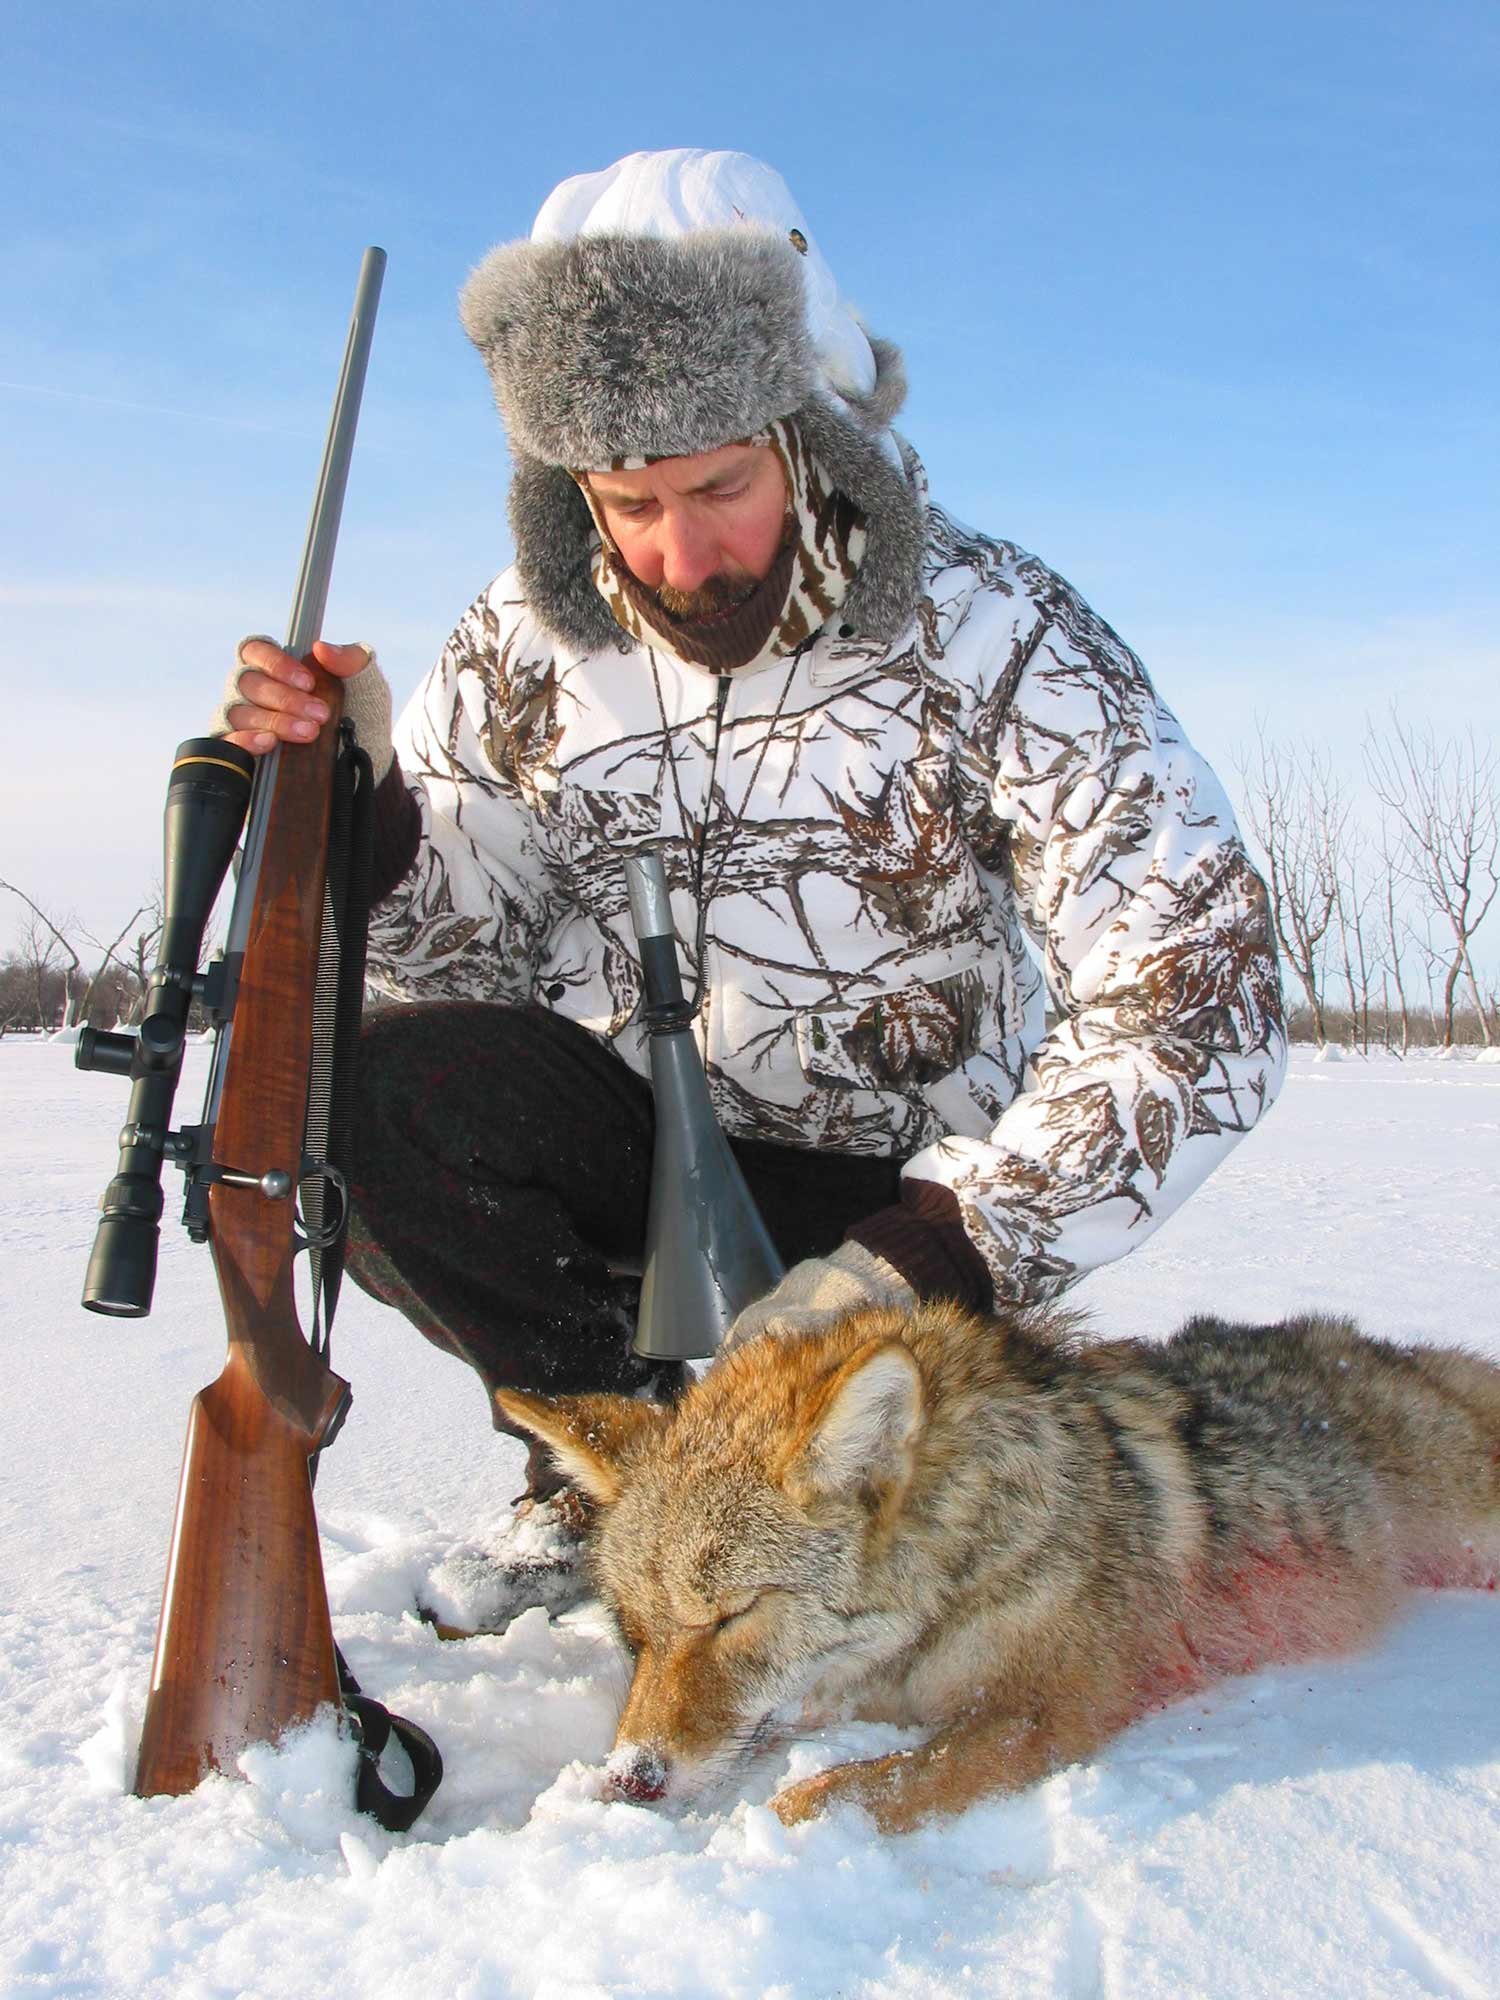 hunter kneeling next to a coyote in the snow